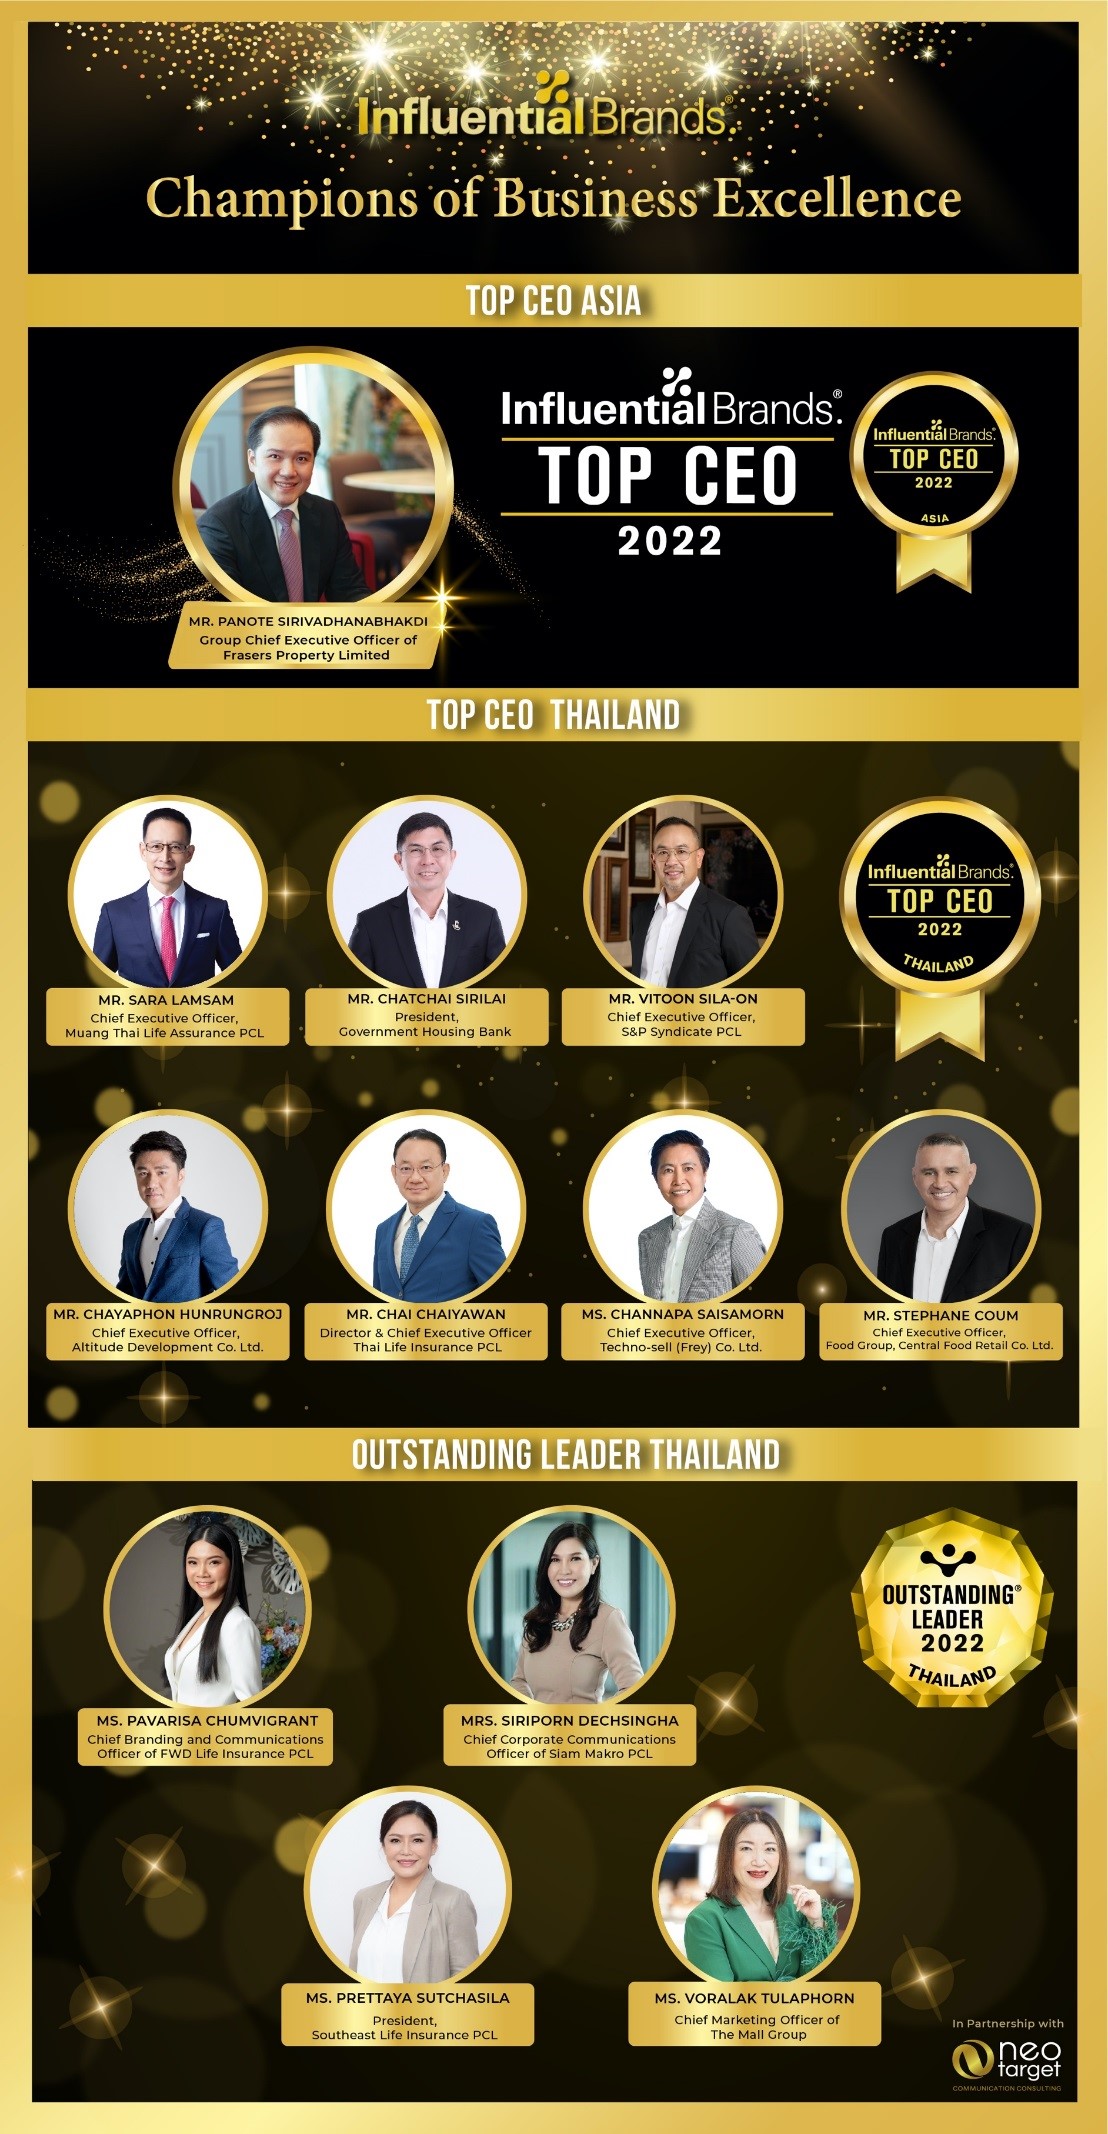 Top CEO Winners from Asia, Thailand and Outstanding Leaders from Thailand